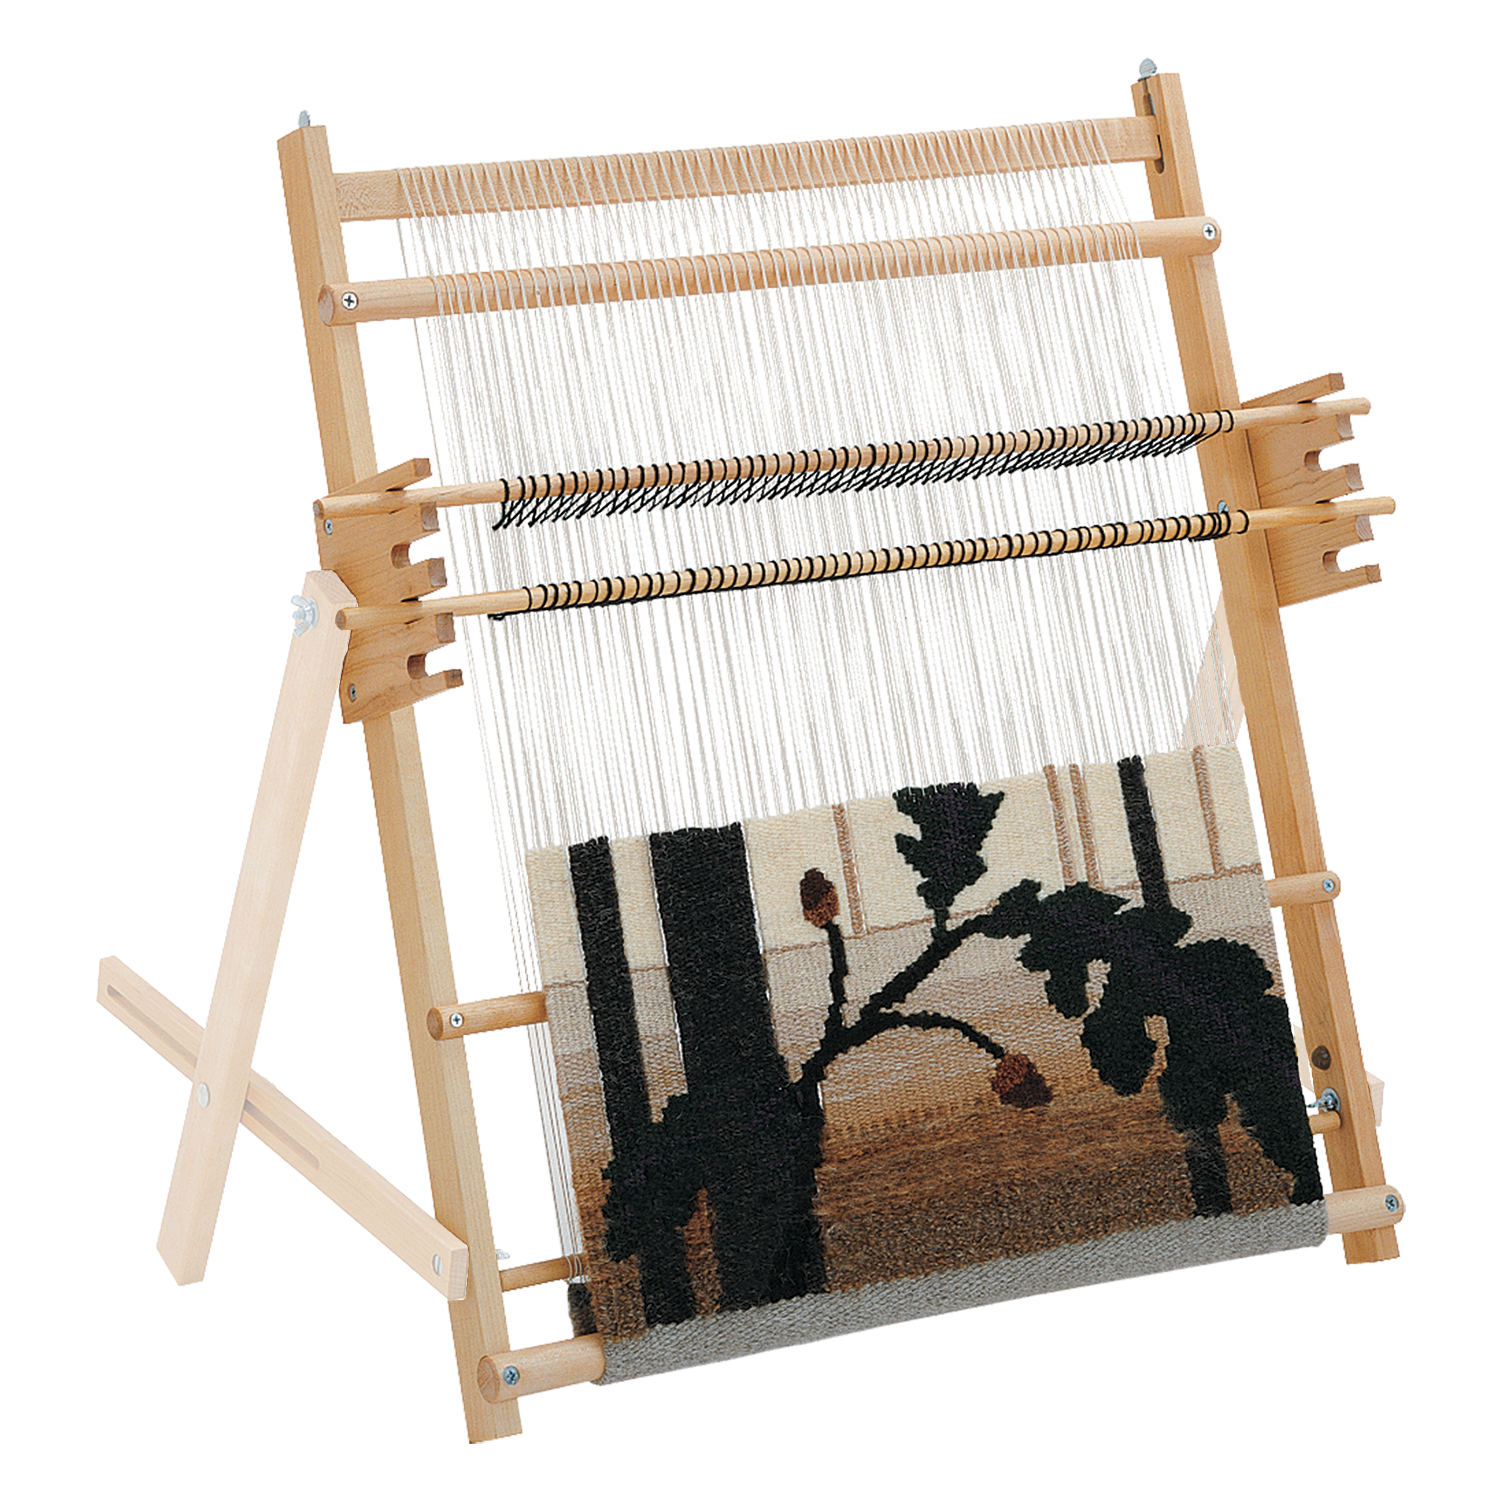 Learn to Weave Tapestry with Rebecca Mezoff: A Loom, a Yarn Kit